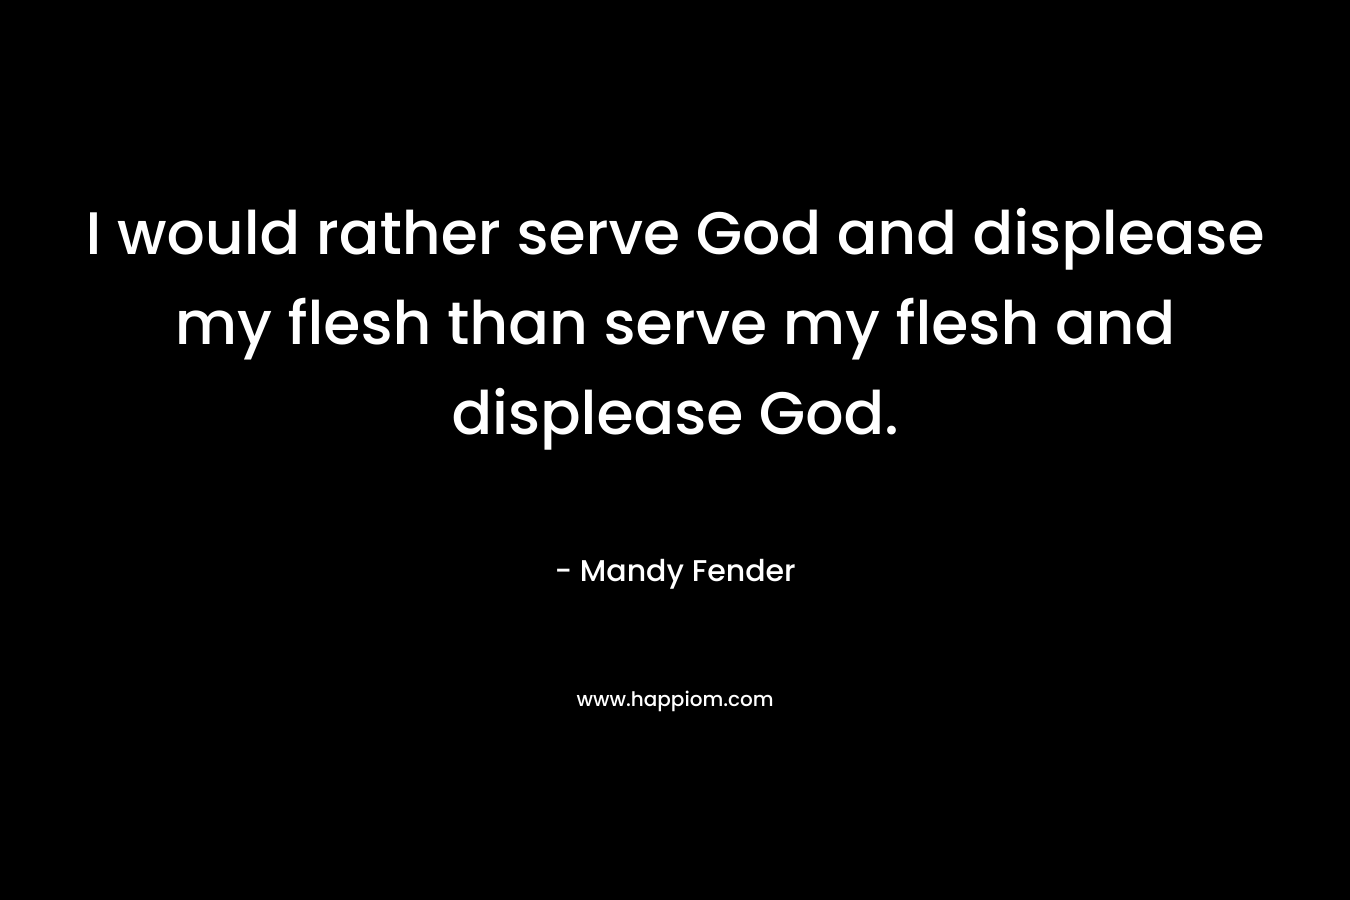 I would rather serve God and displease my flesh than serve my flesh and displease God.